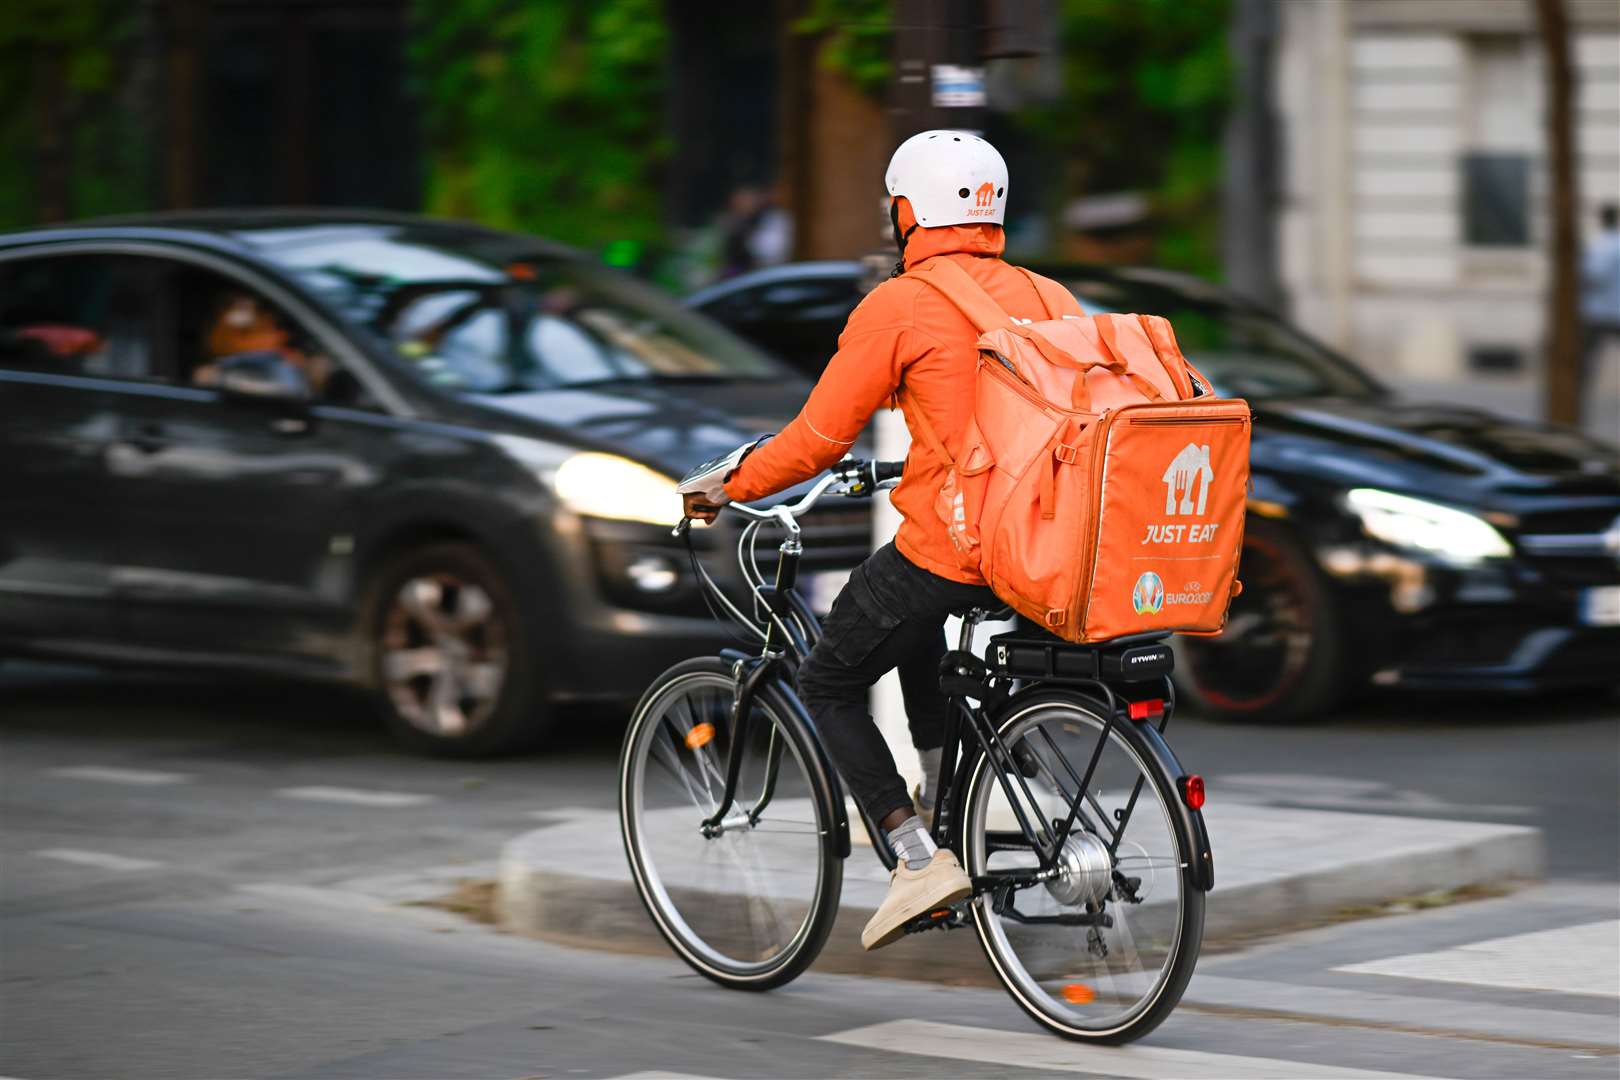 A courier on a delivery run.